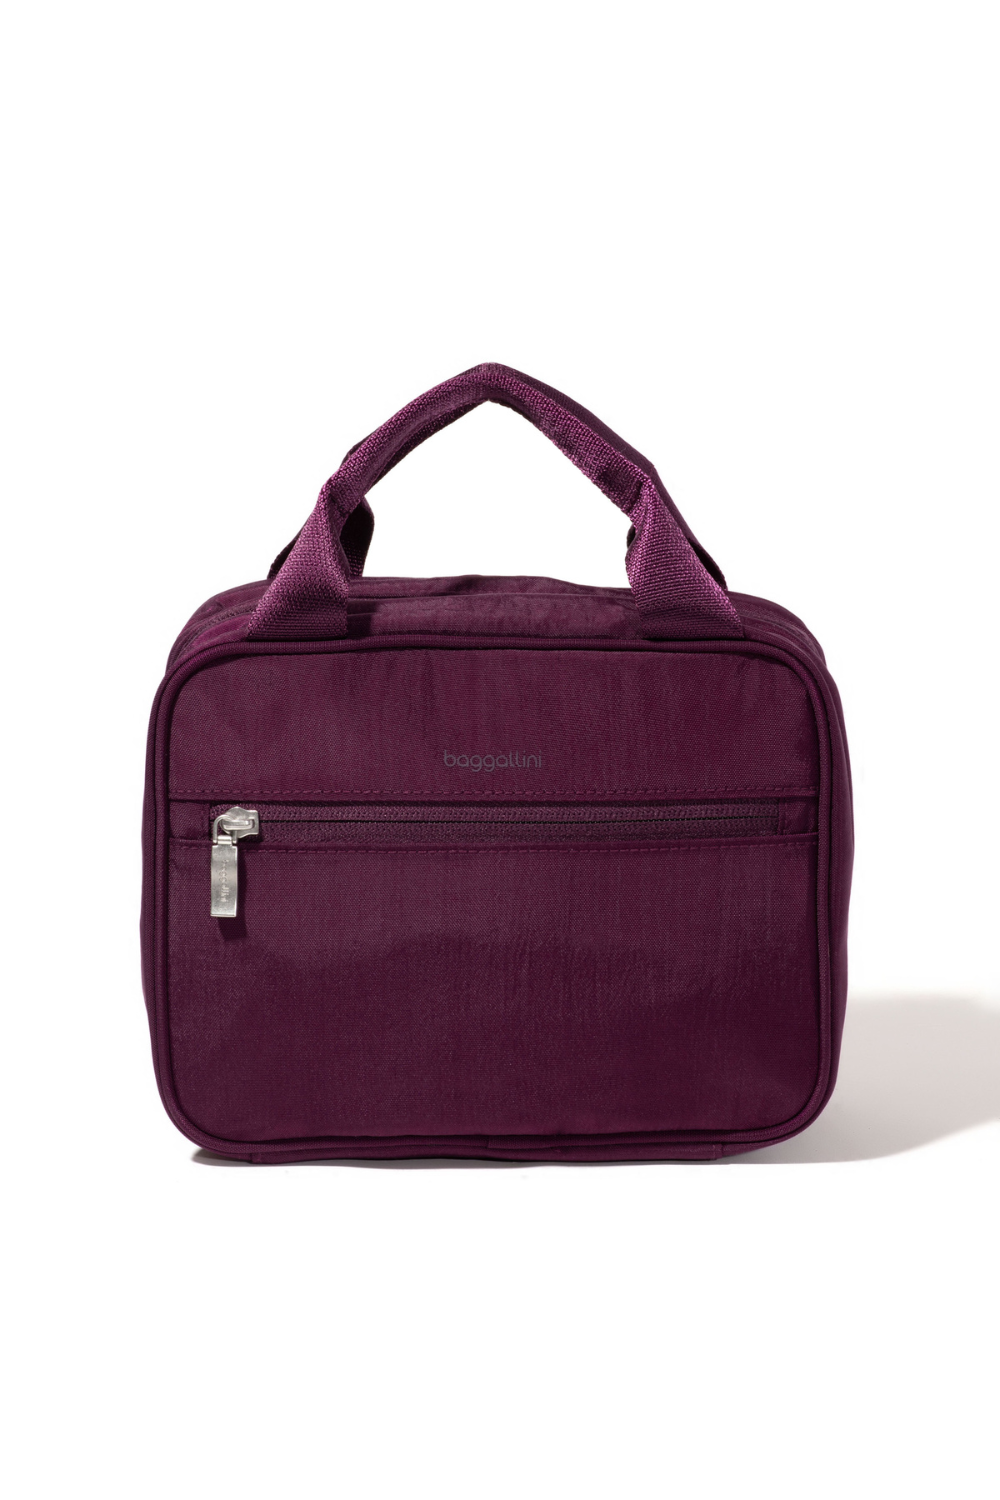 Baggallini Hanging Travel Toiletry Kit | Mulberry